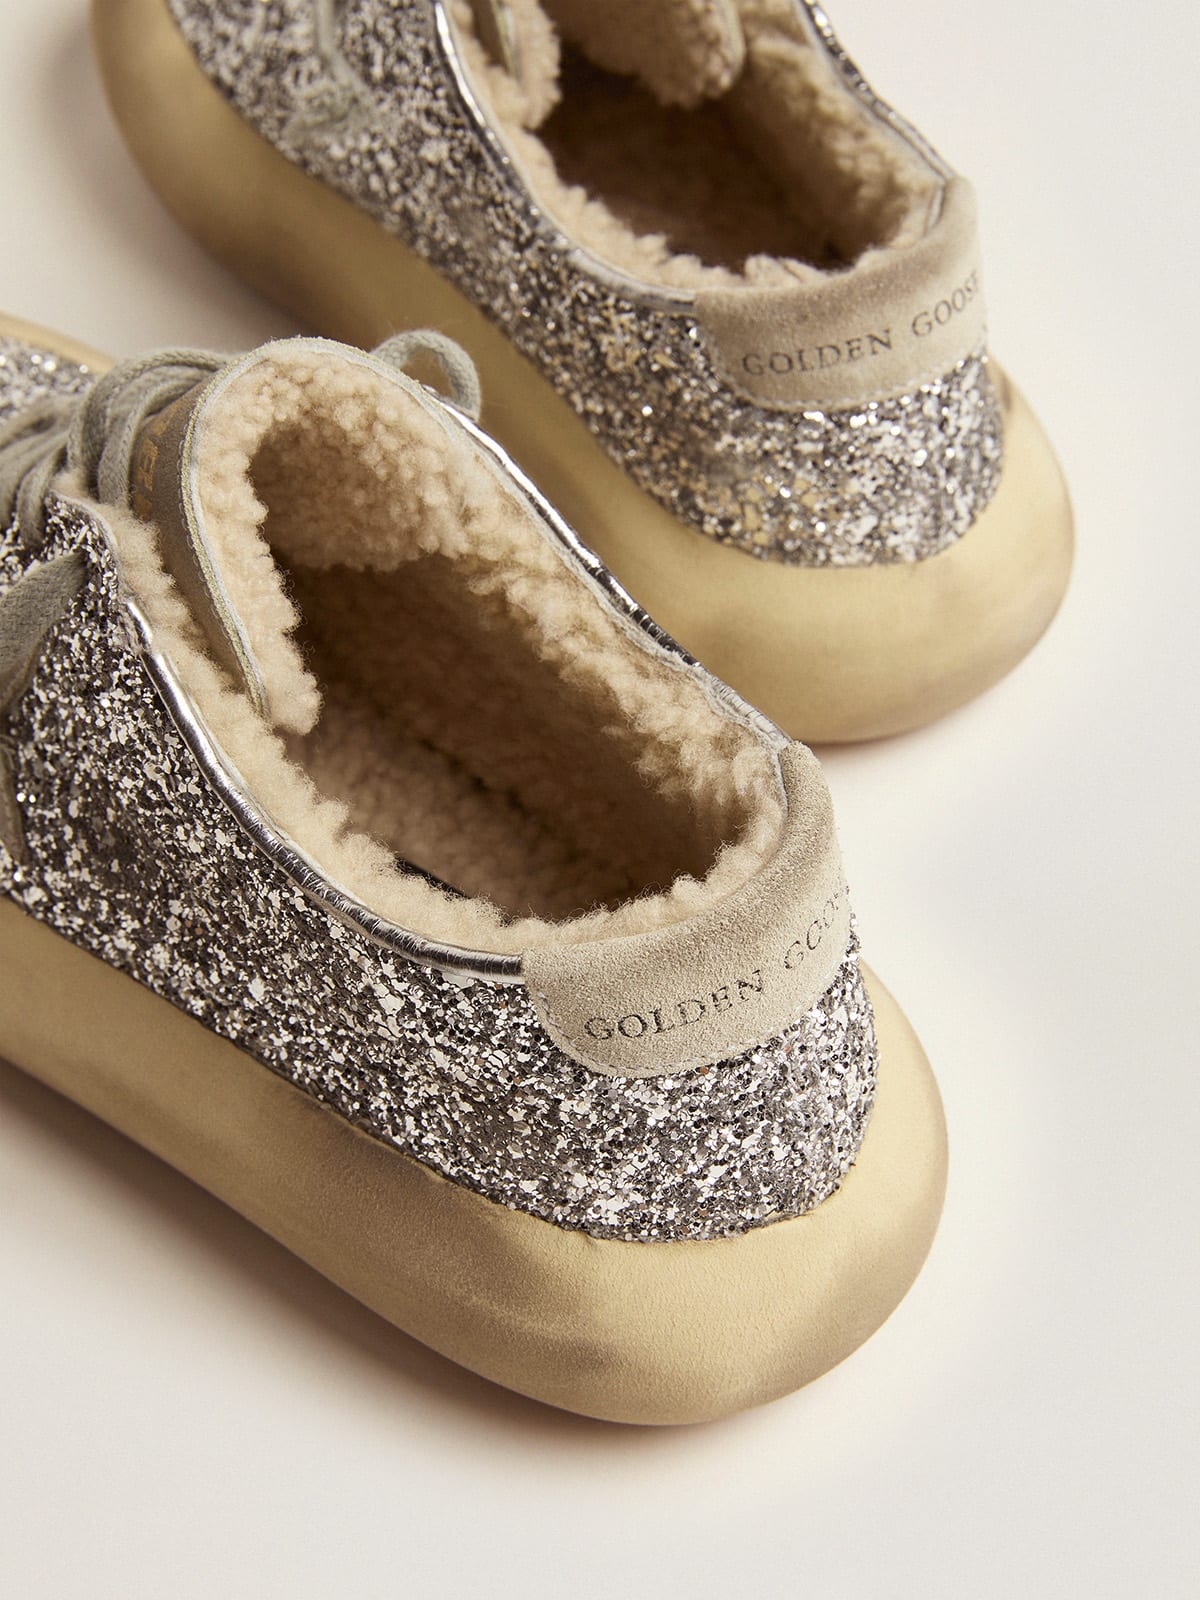 Golden Goose - Women's Space-Star shoes in silver glitter with shearling lining in 